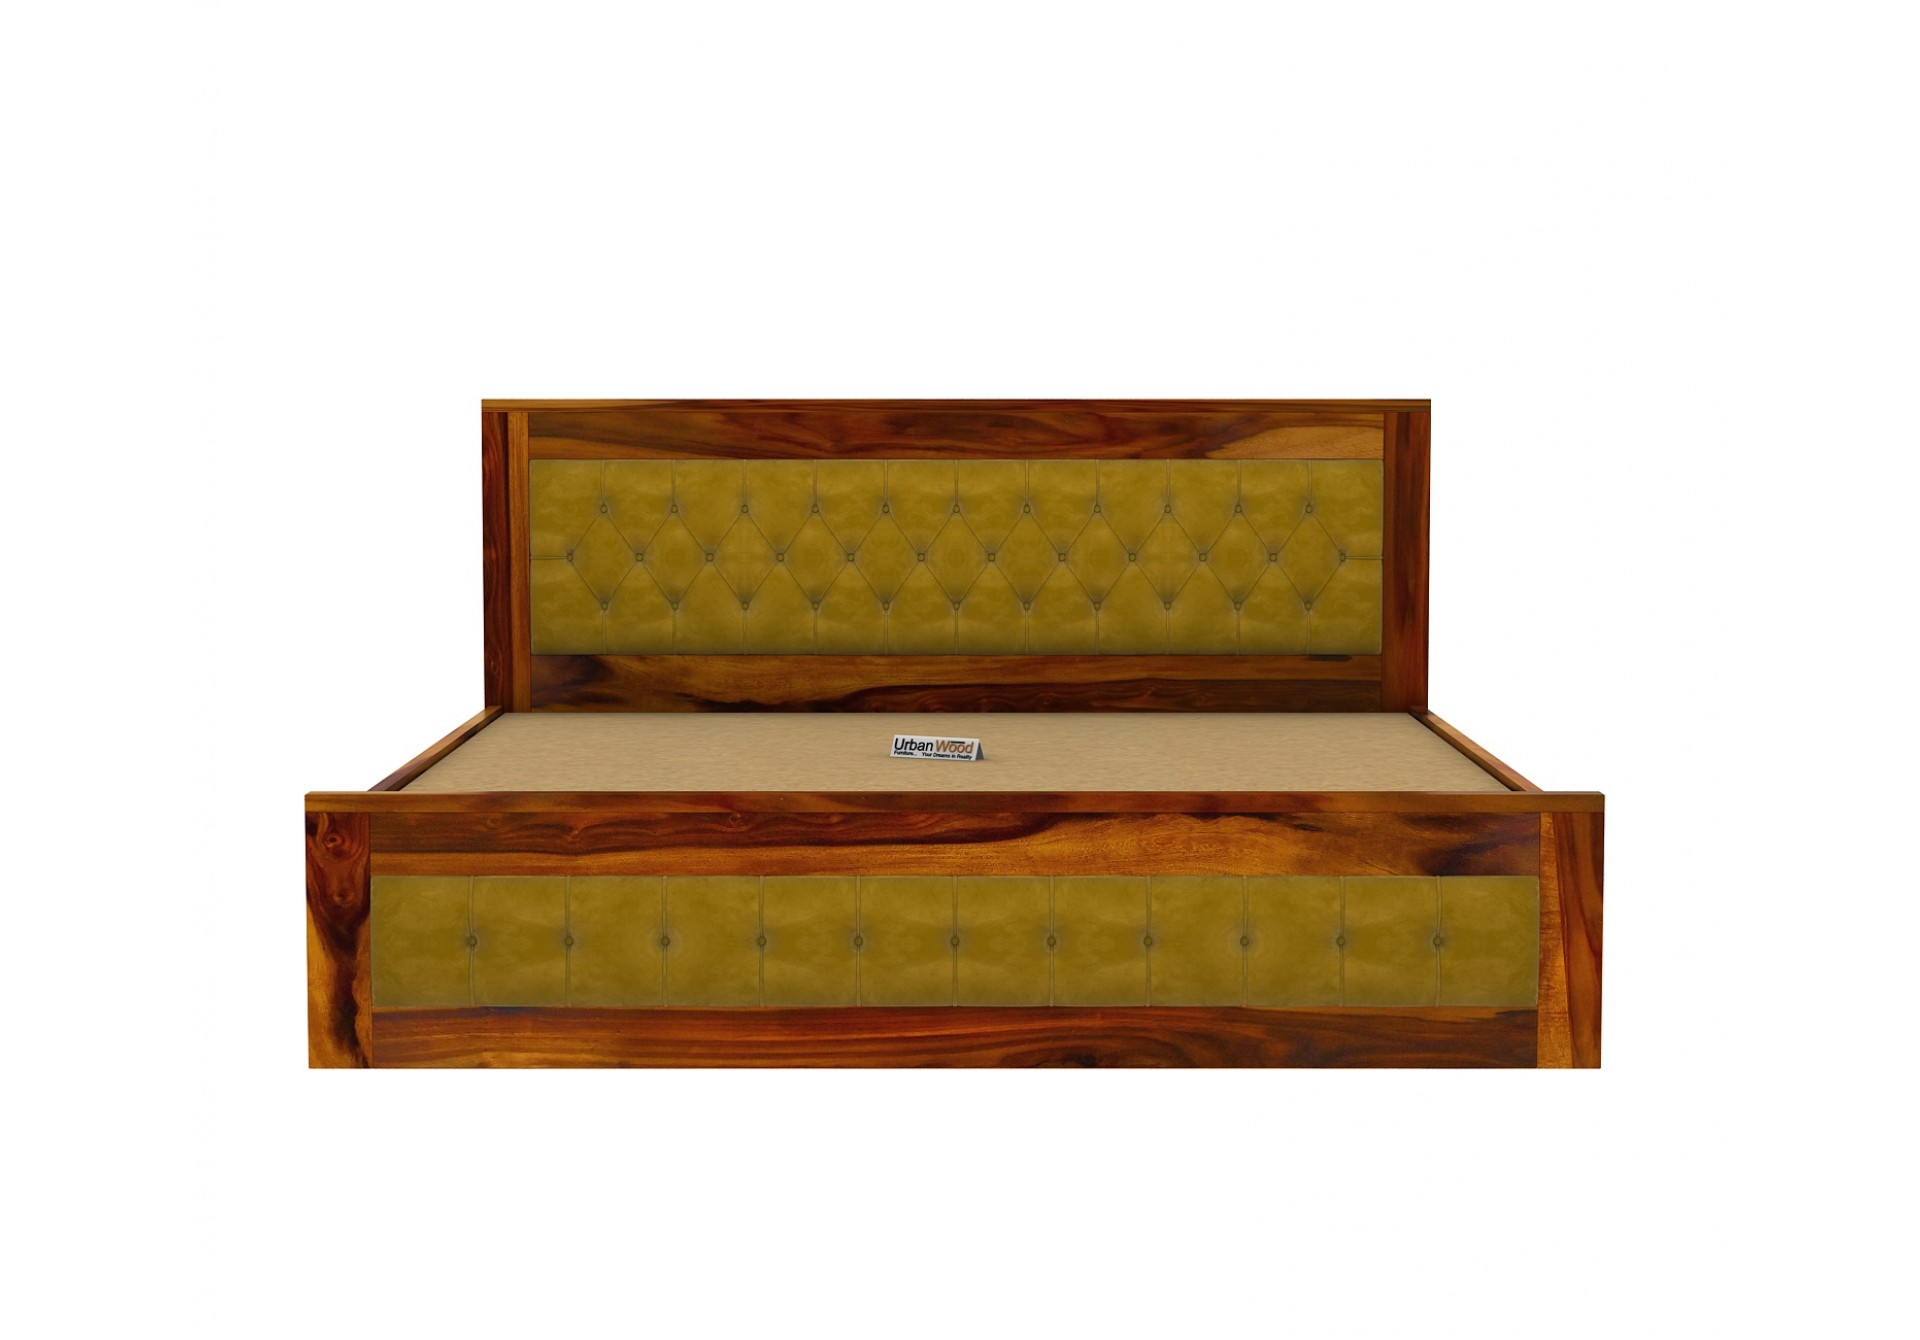 Jolly Wooden Bed Hydraulic Storage ( Queen Size, Honey Finish )